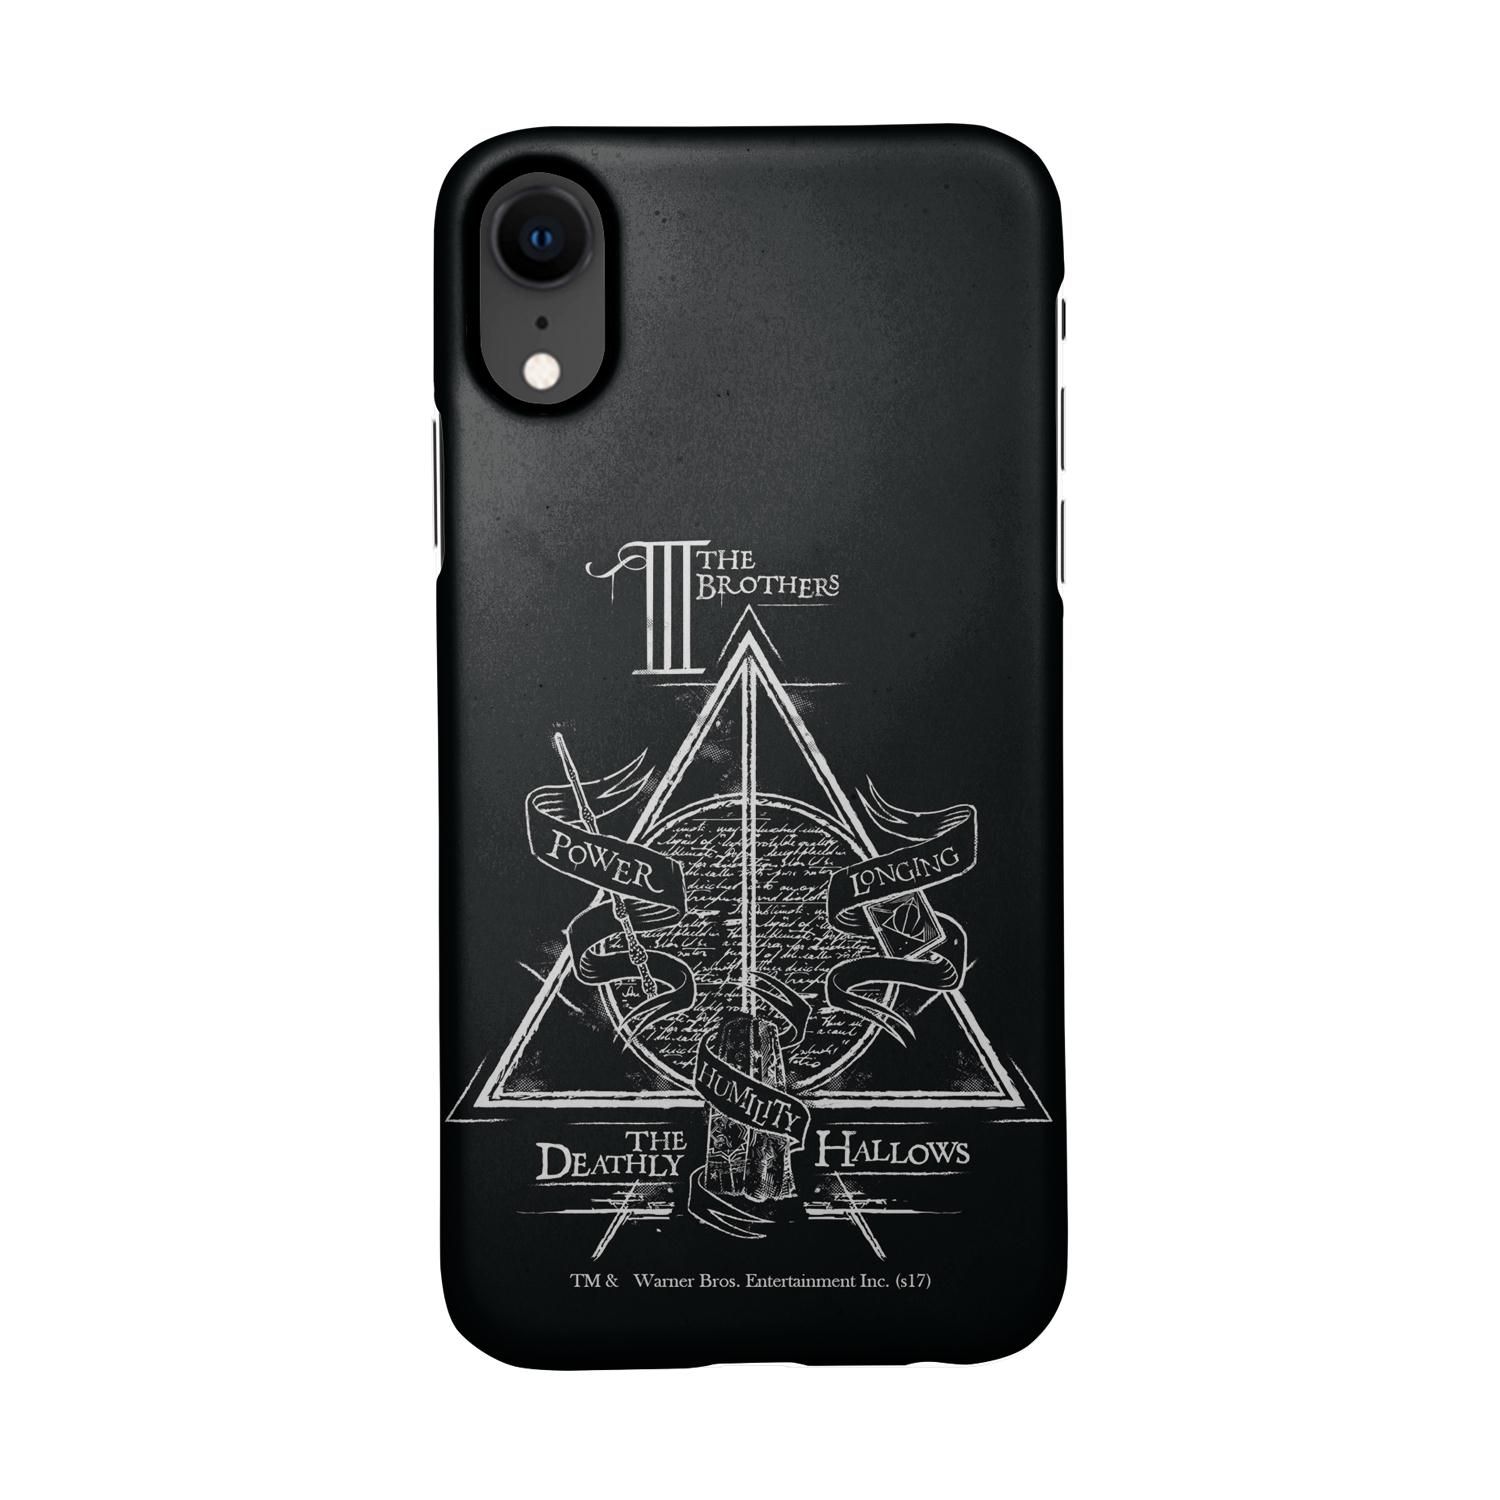 Buy The Deathly Hallows - Sleek Phone Case for iPhone XR Online